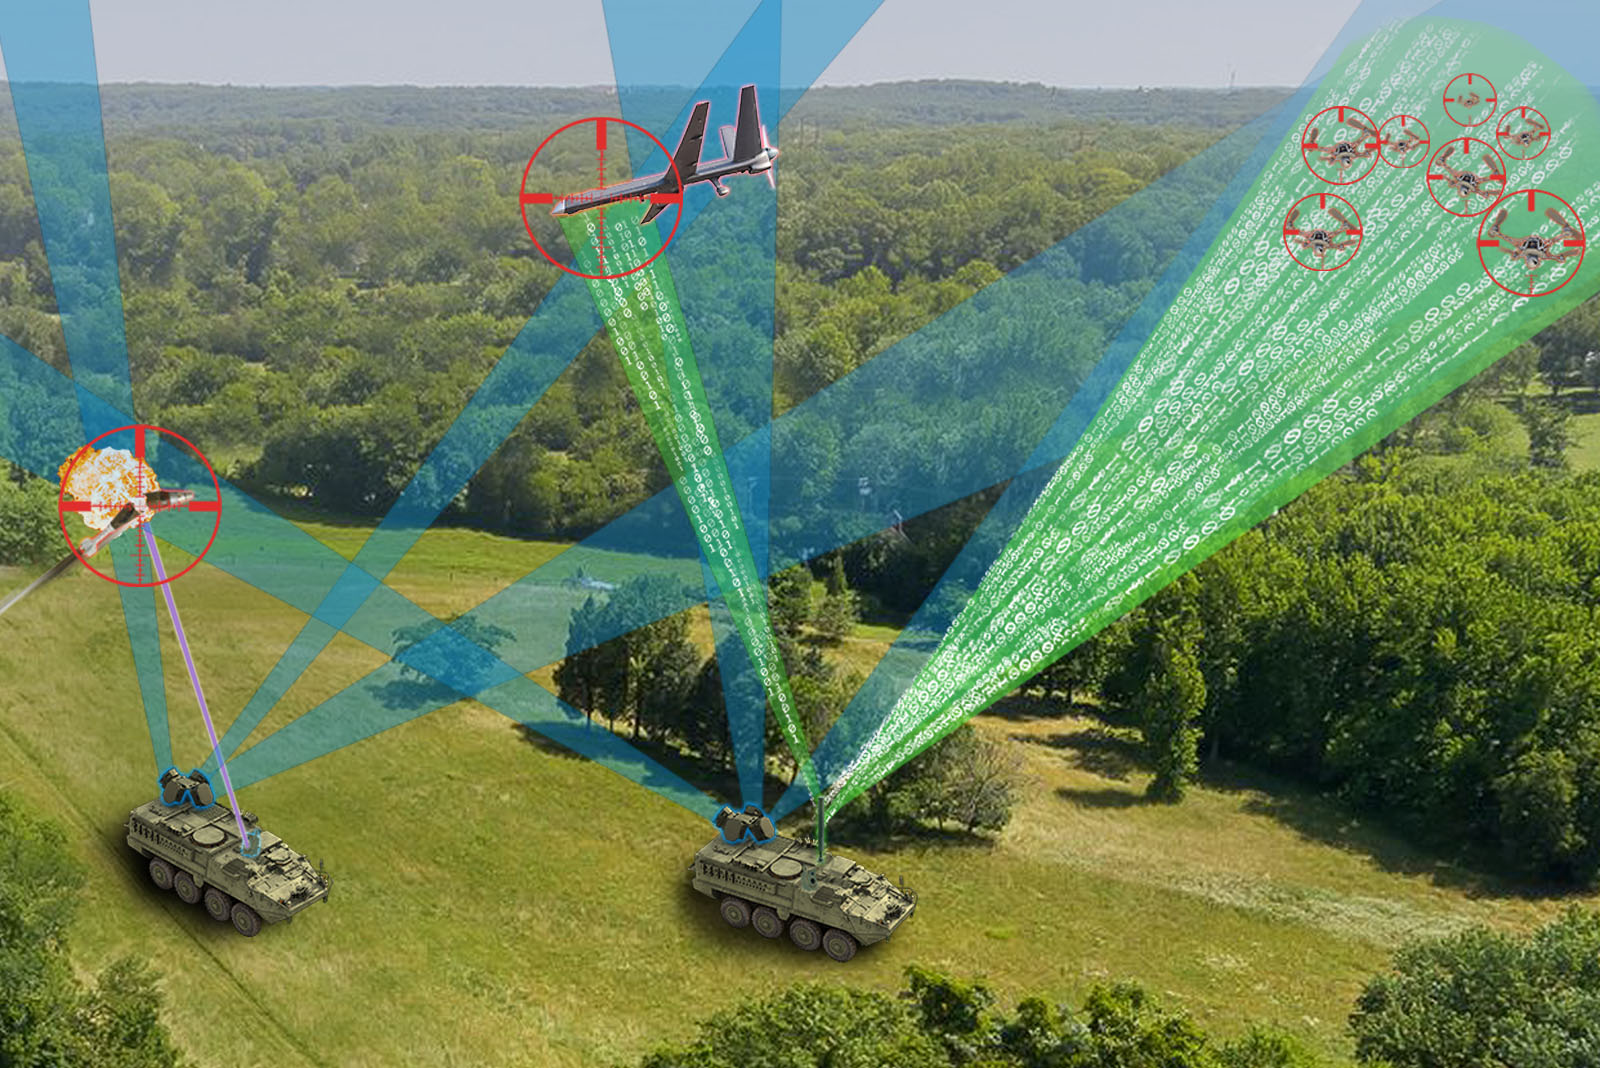 Silent Archer concept image with the Silent Archer technologies on two Stryker platforms detecting and defeating a group 3 UAS, a UAS swarm and an artillery munition threat in a forested area